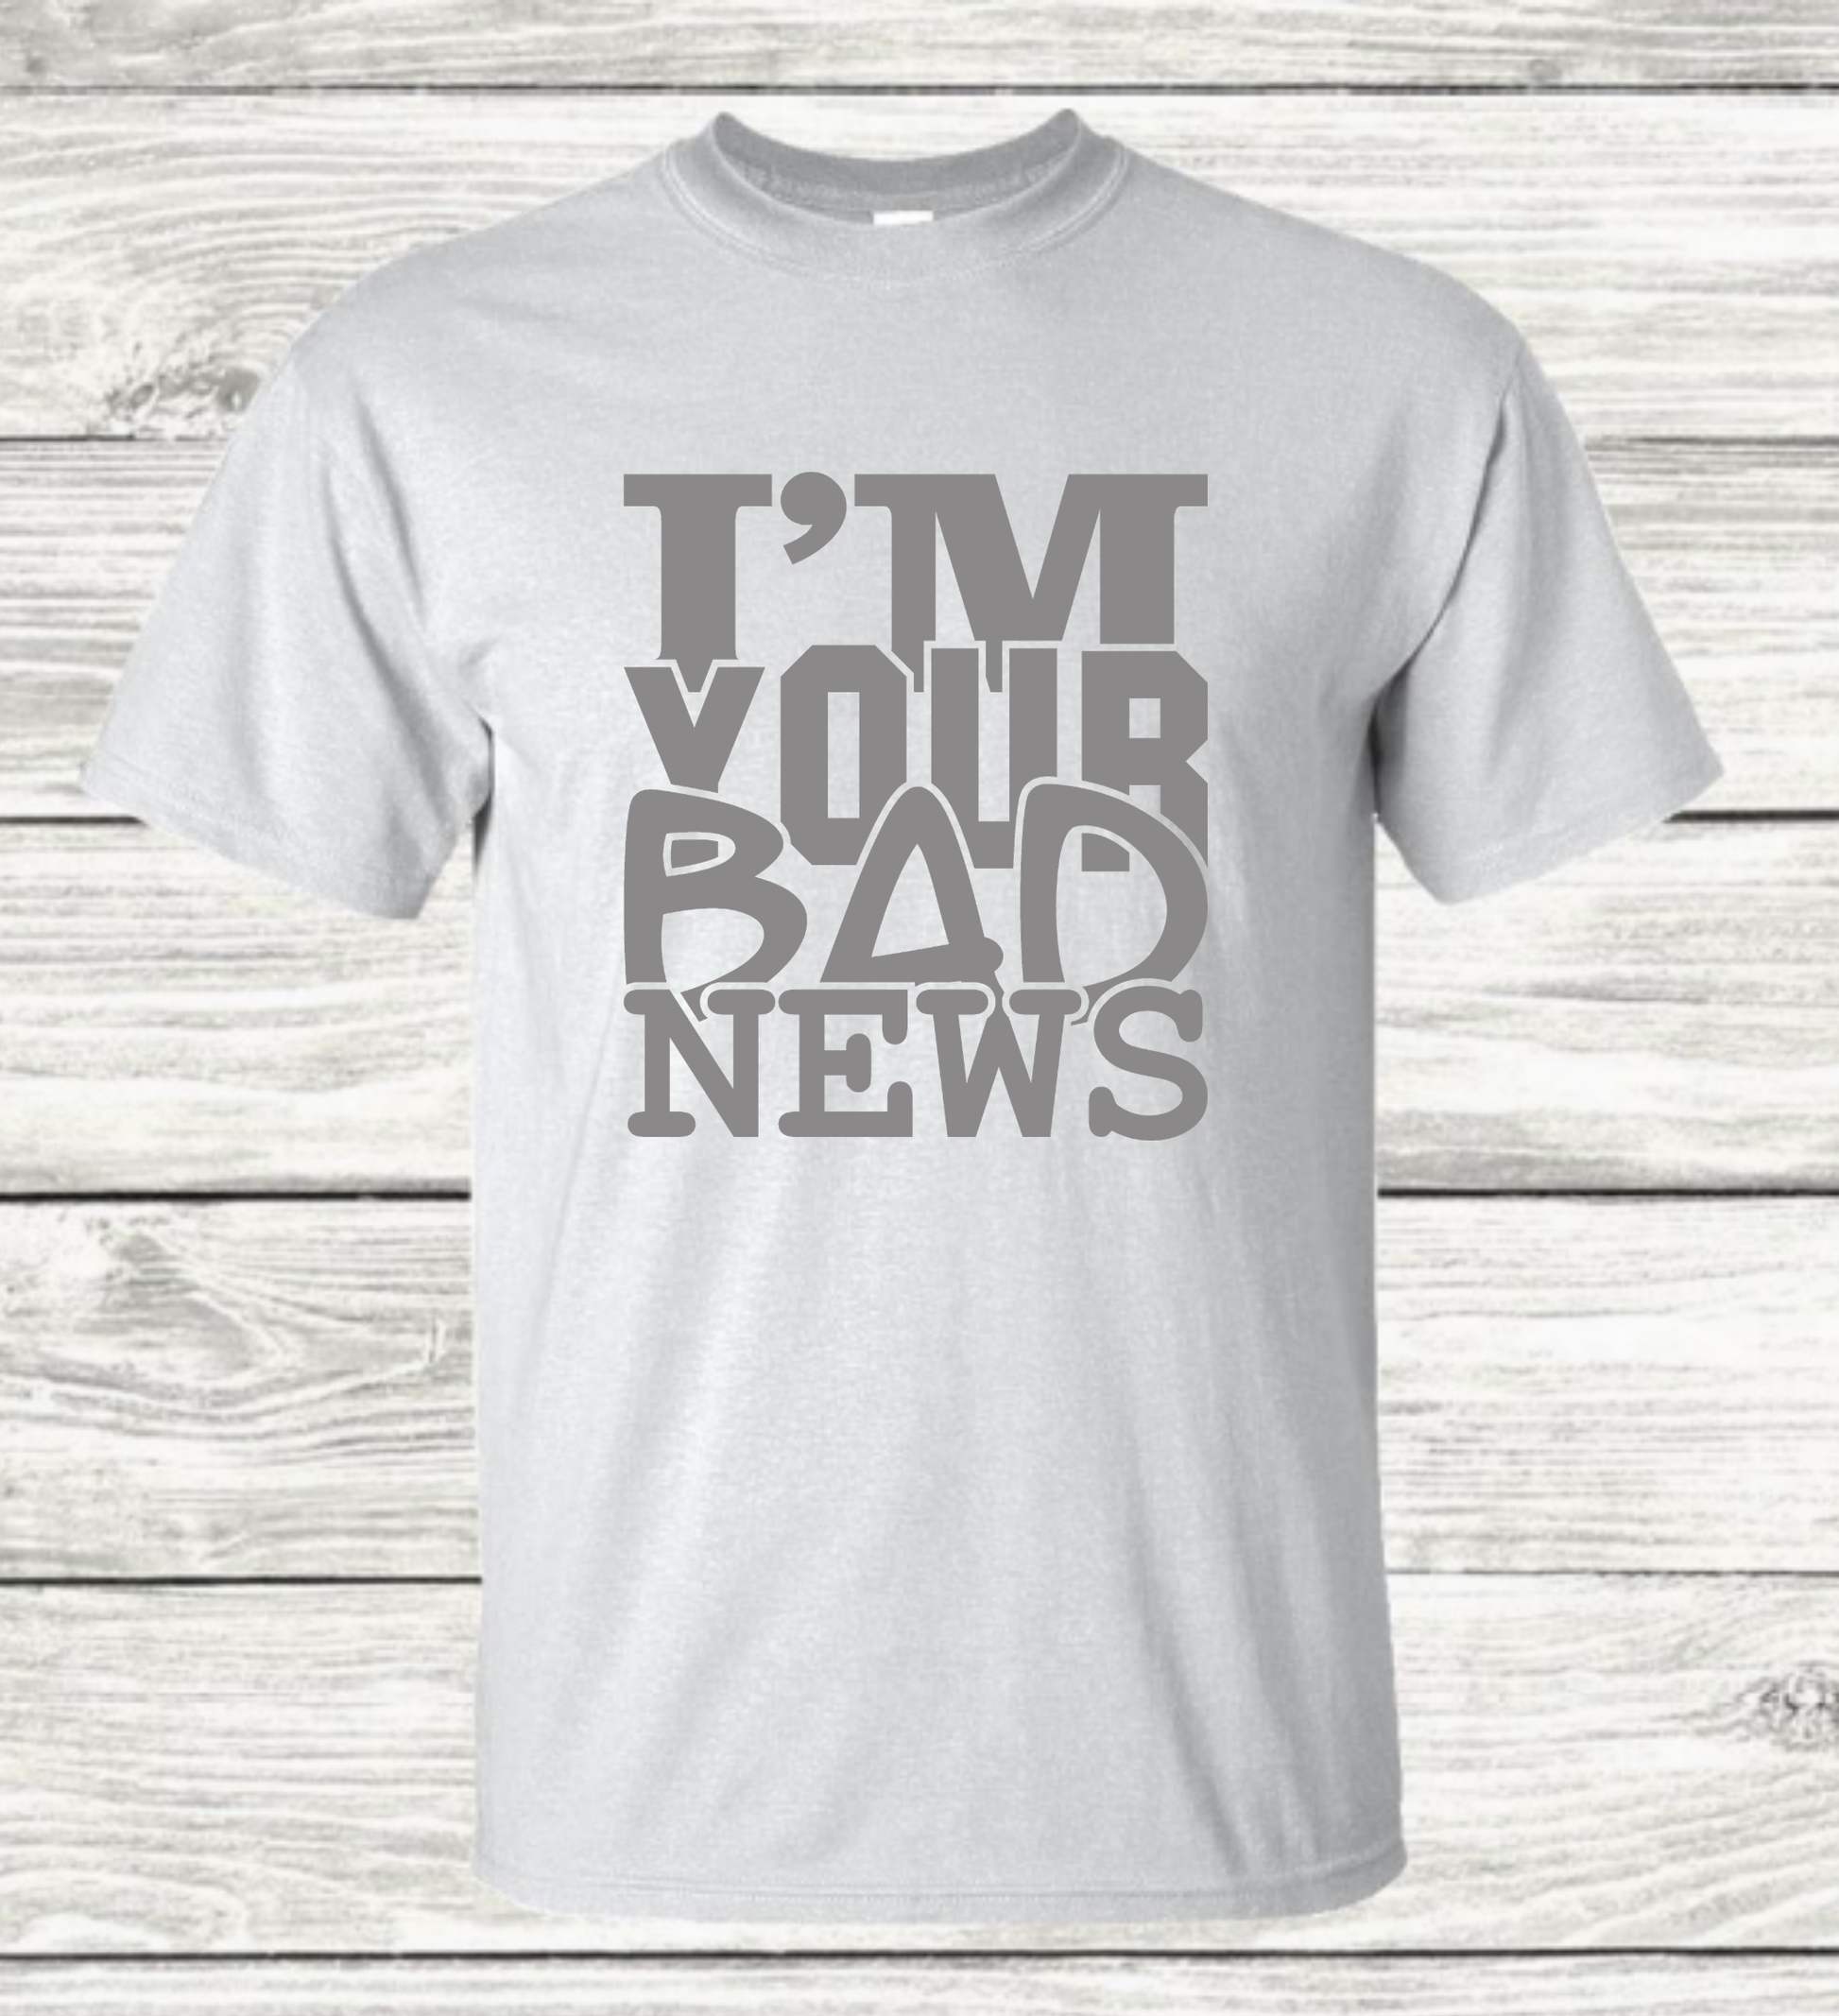 I'm Your Bad News - Graphic T-Shirt - Mister Snarky's